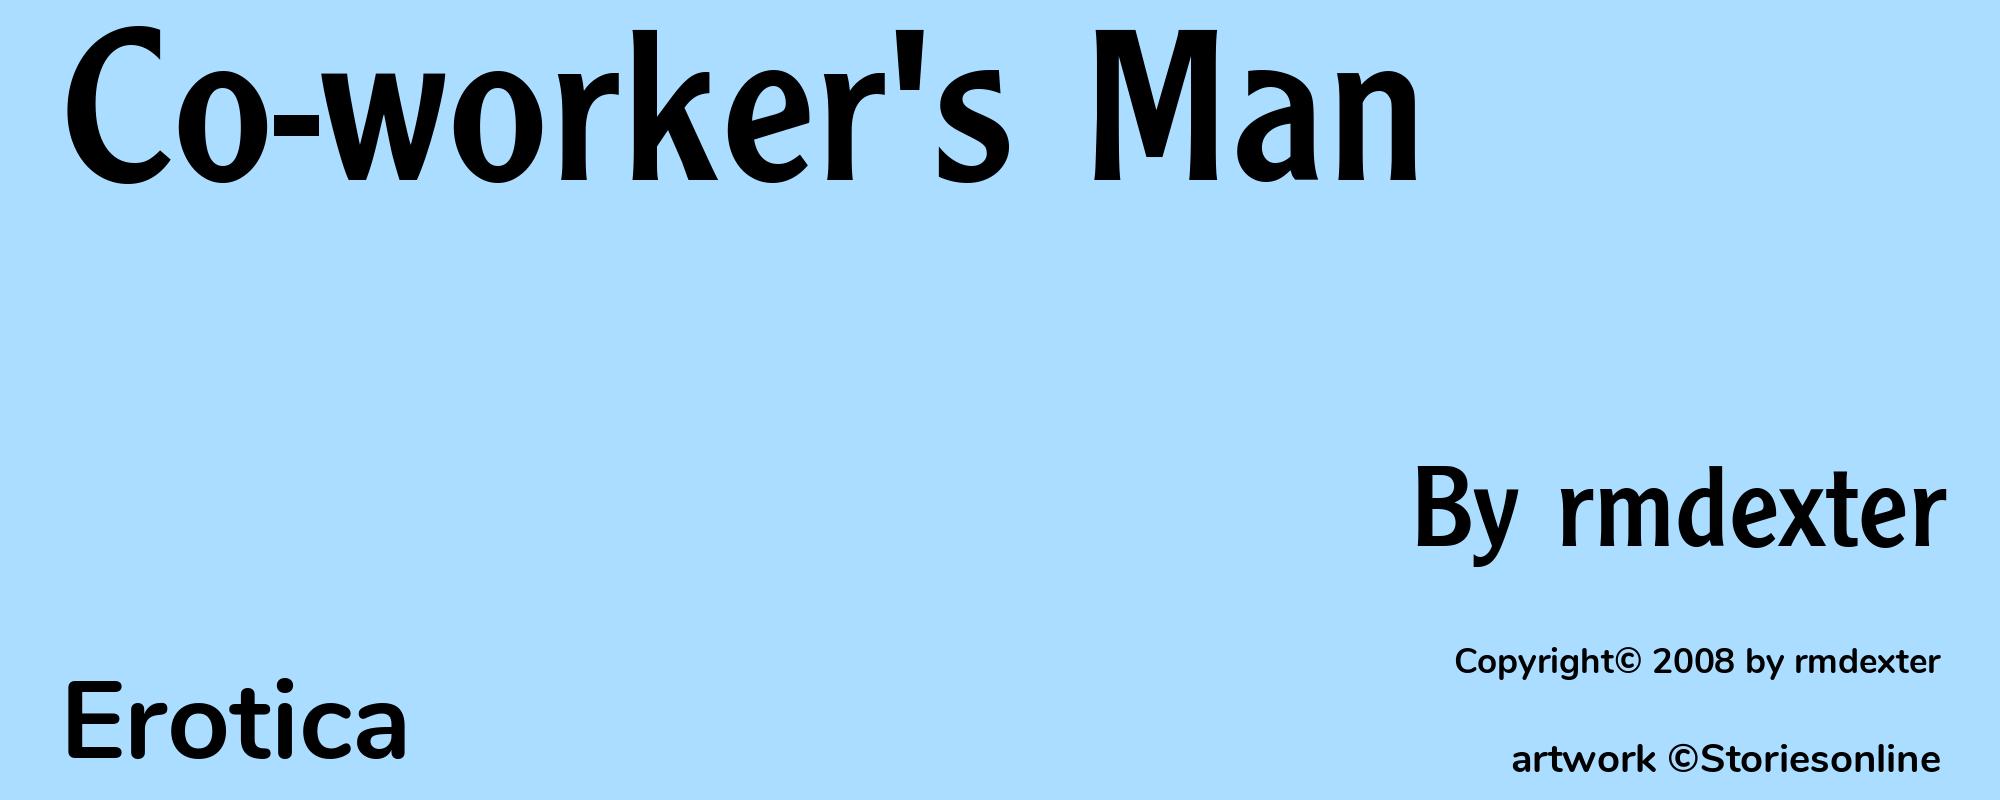 Co-worker's Man - Cover